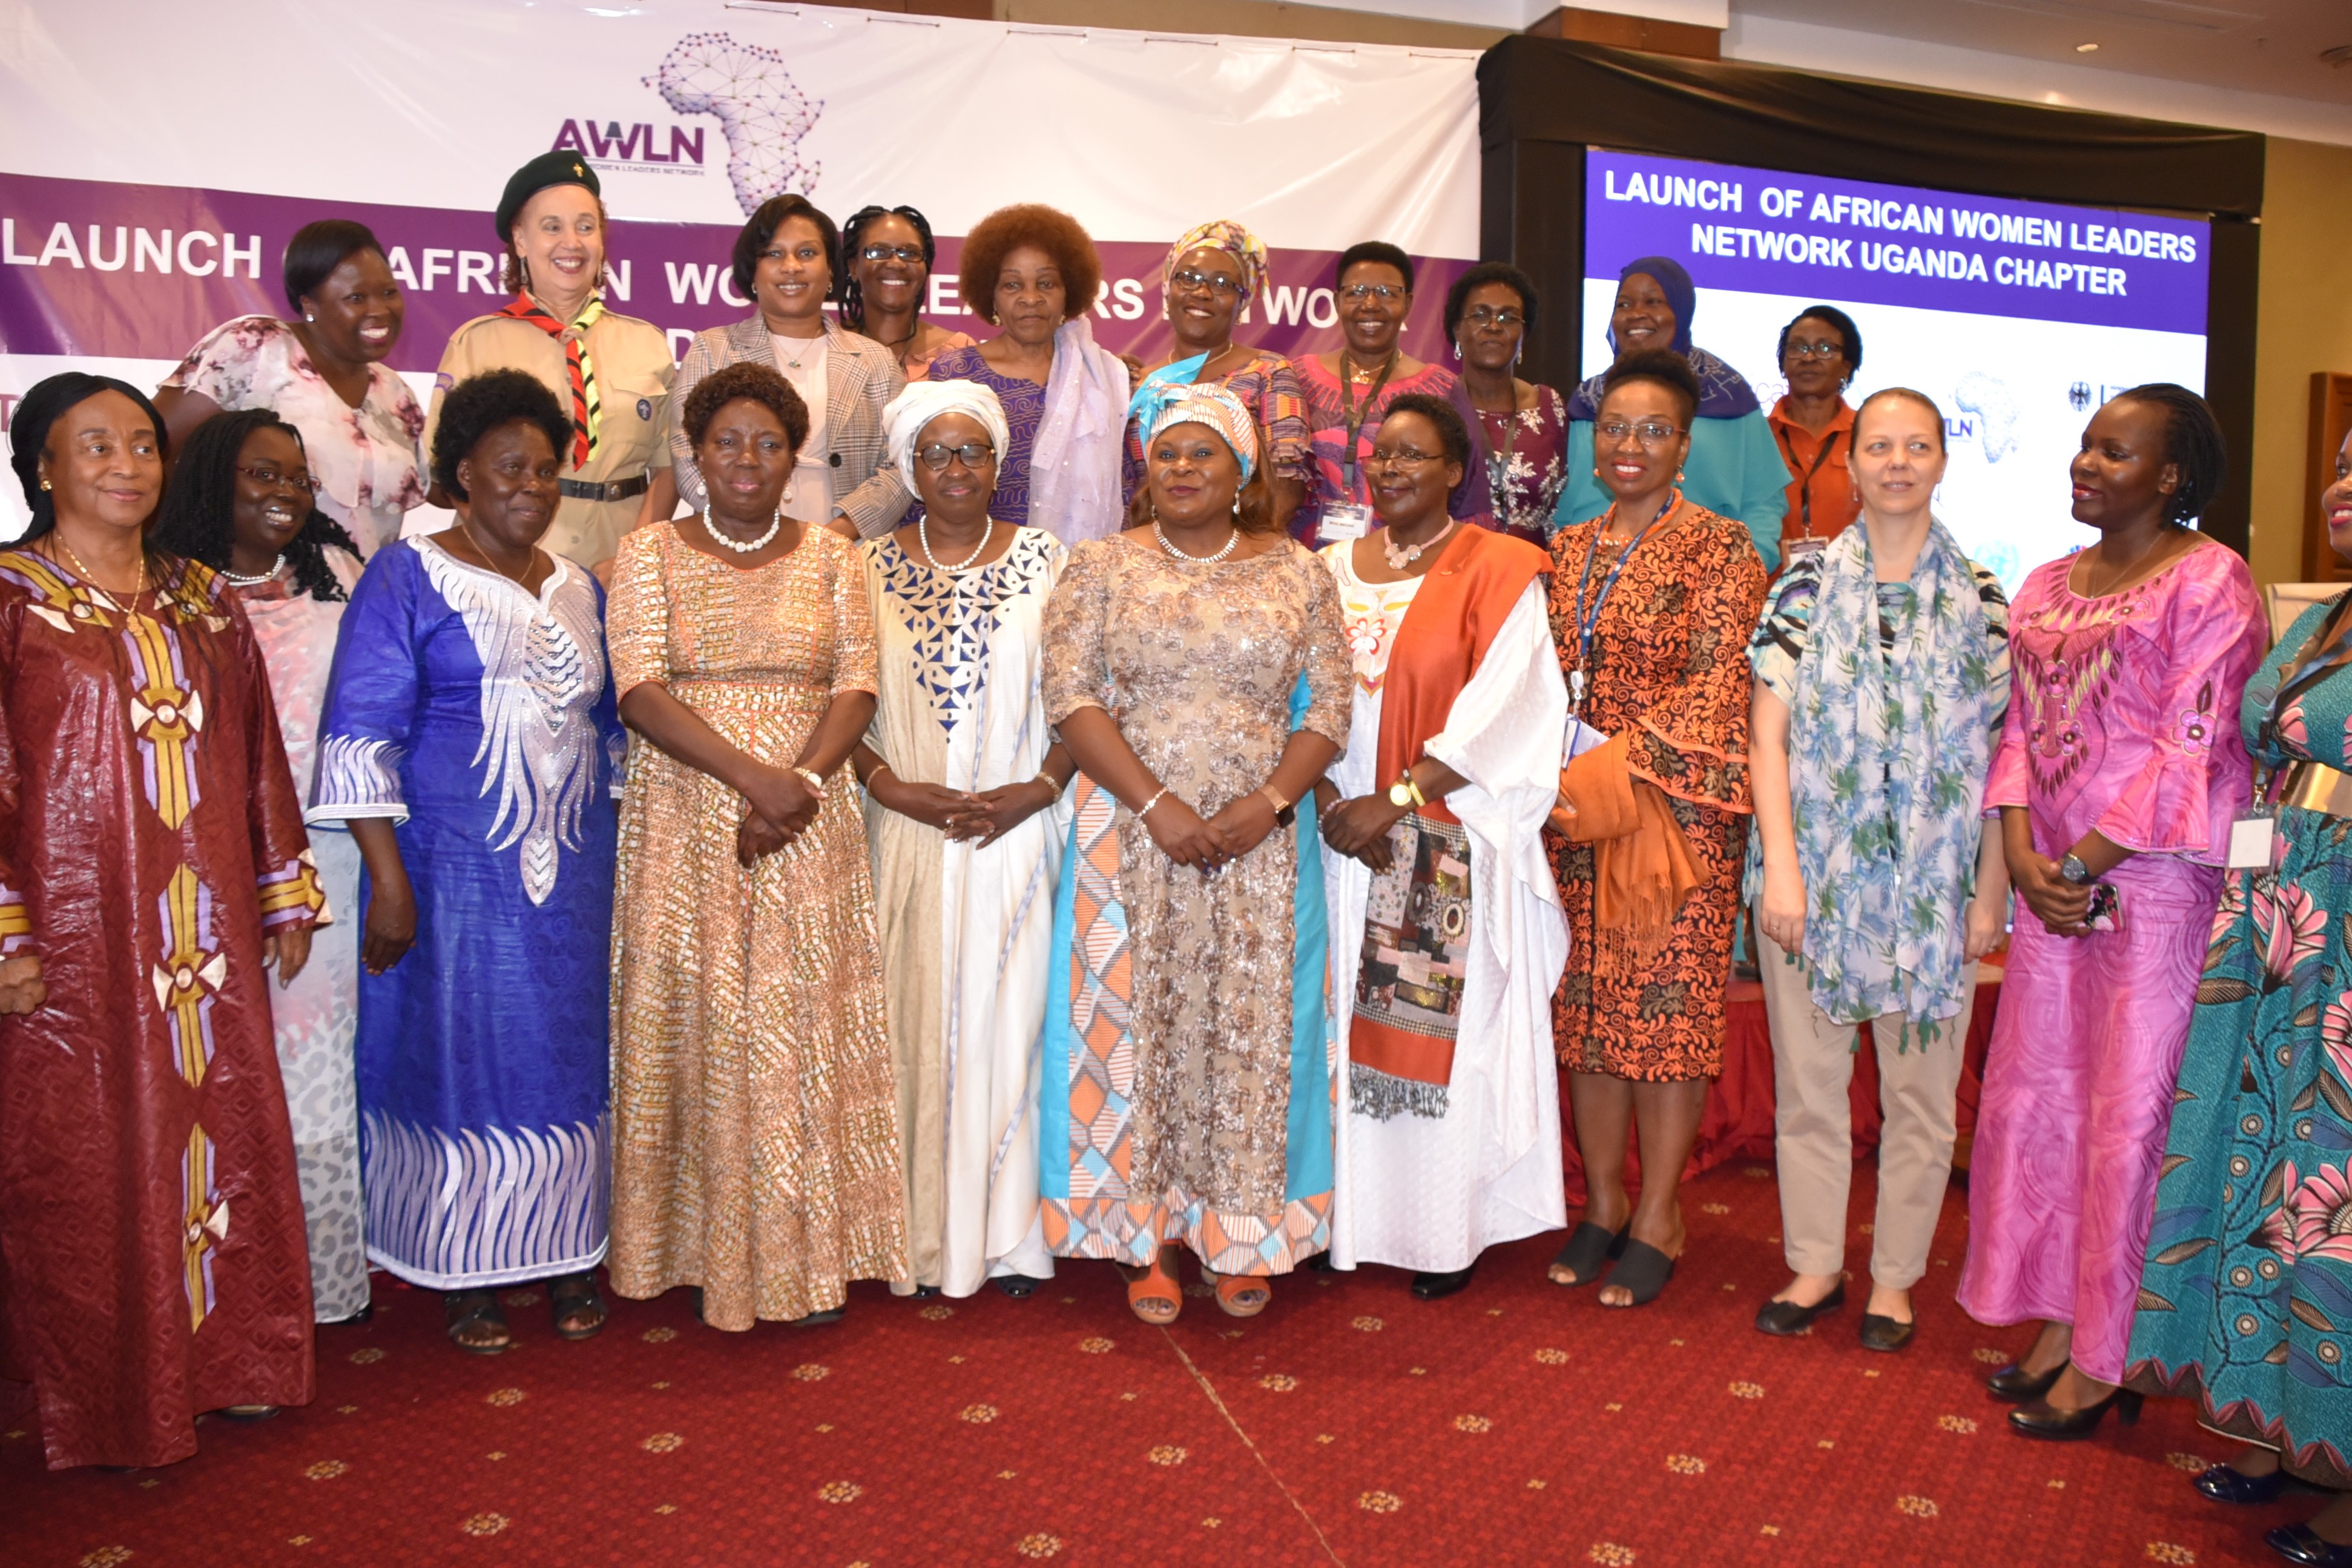 Women activists with the RCO and speaker